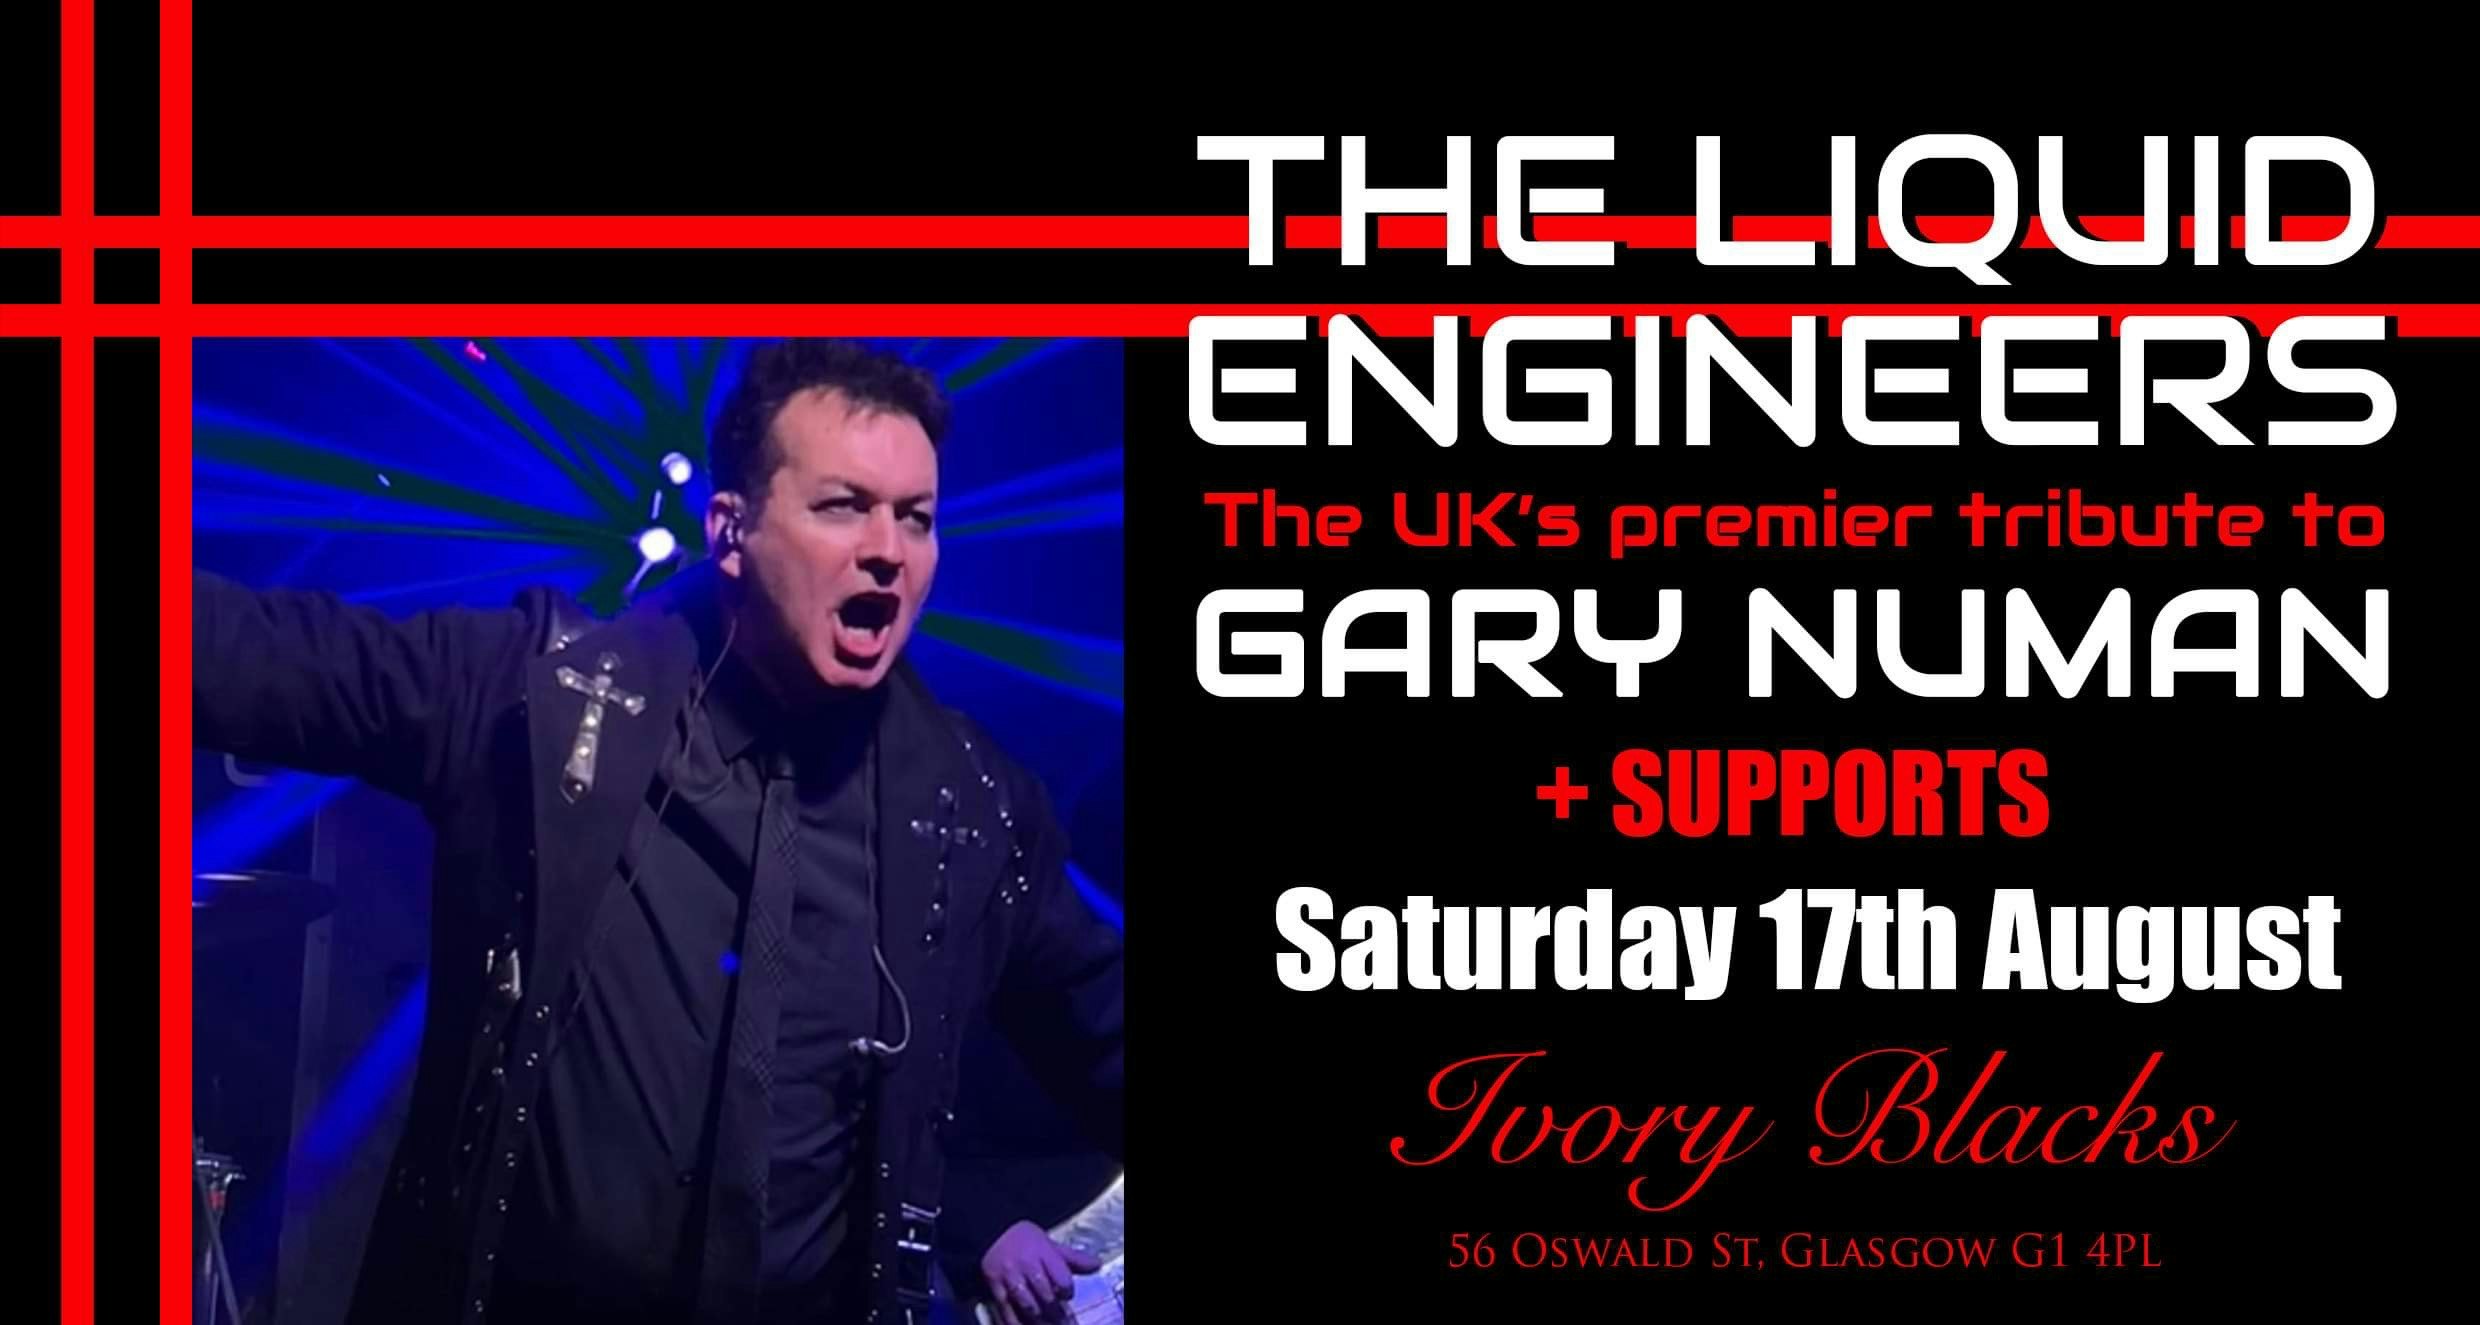 THE LIQUID ENGINEERS – The UK’s Premiere Tribute to GARY NUMAN